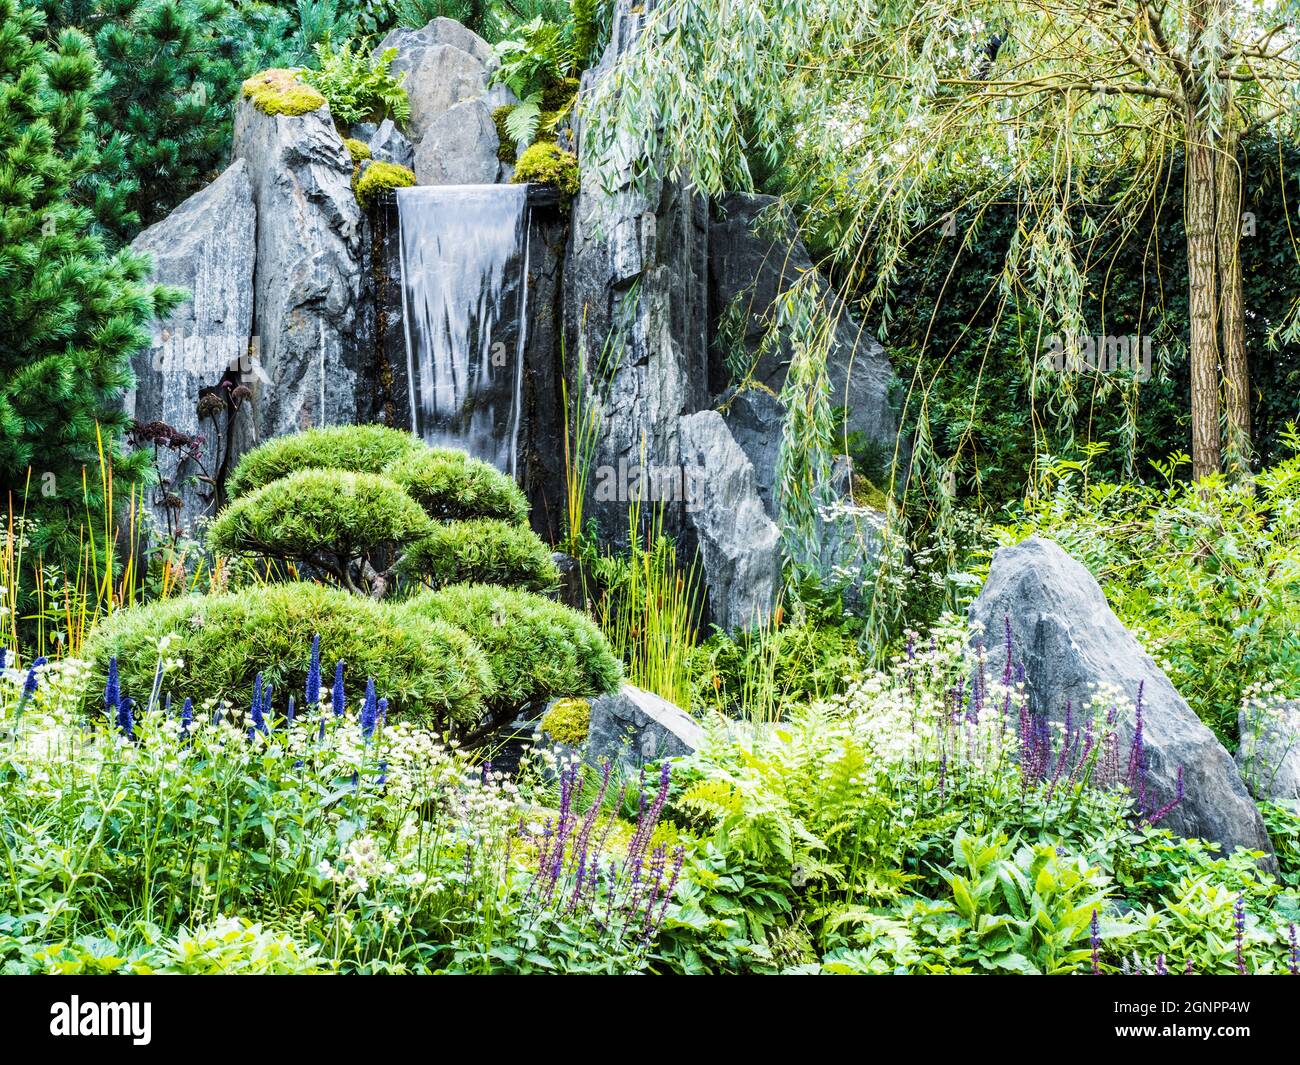 One of the show gardens at the RHS Chelsea Flower Show 2021. Stock Photo